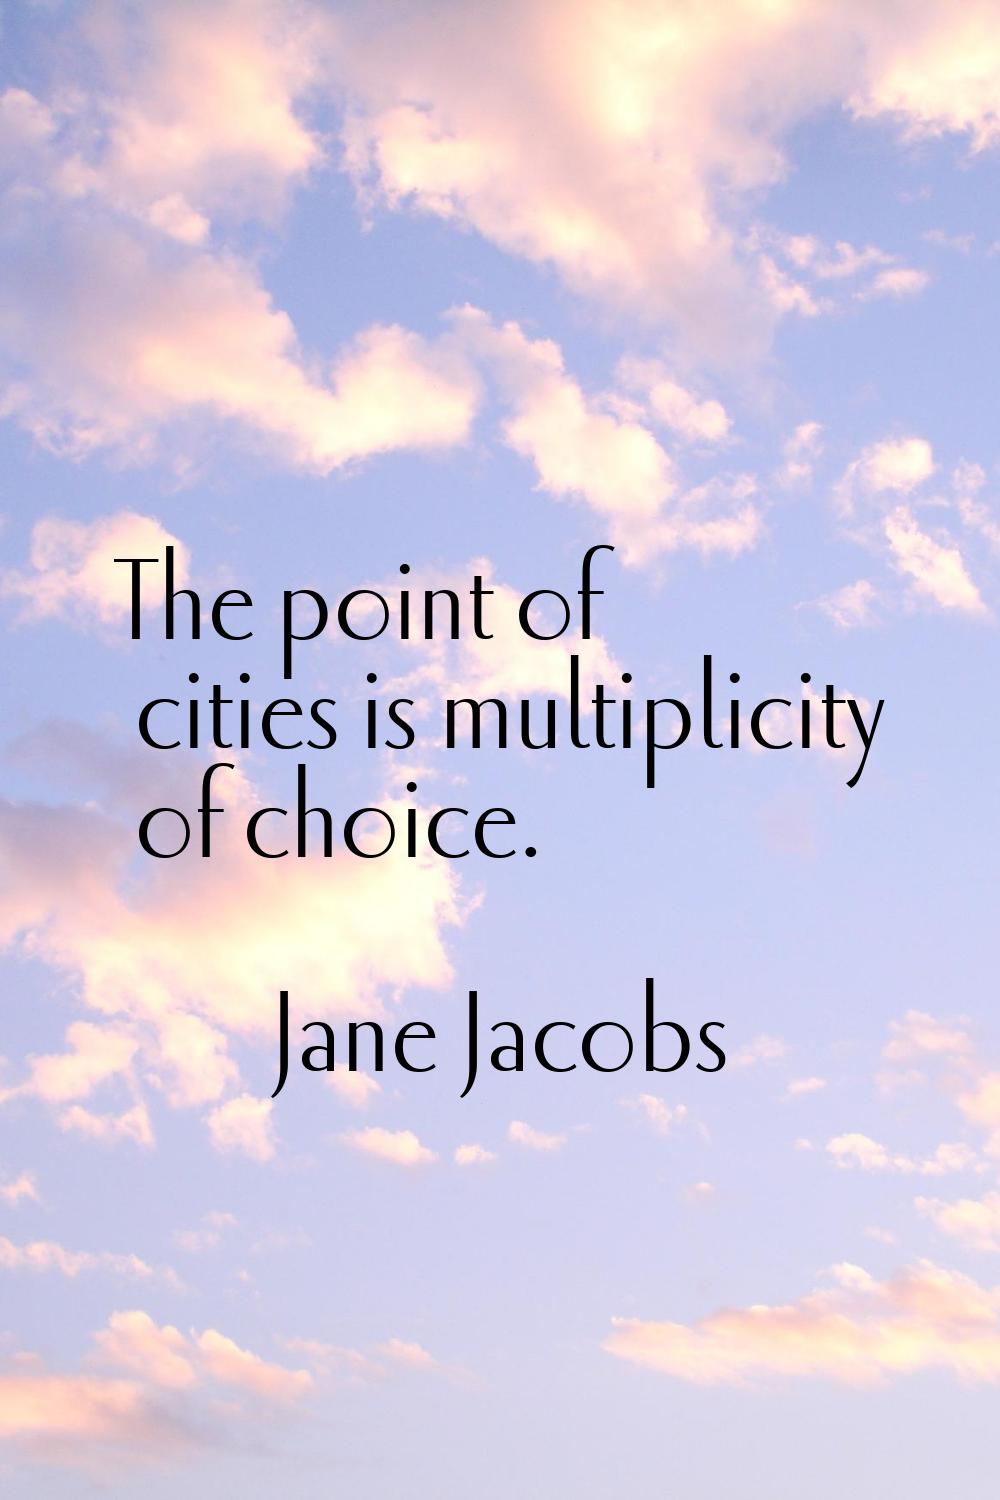 The point of cities is multiplicity of choice.